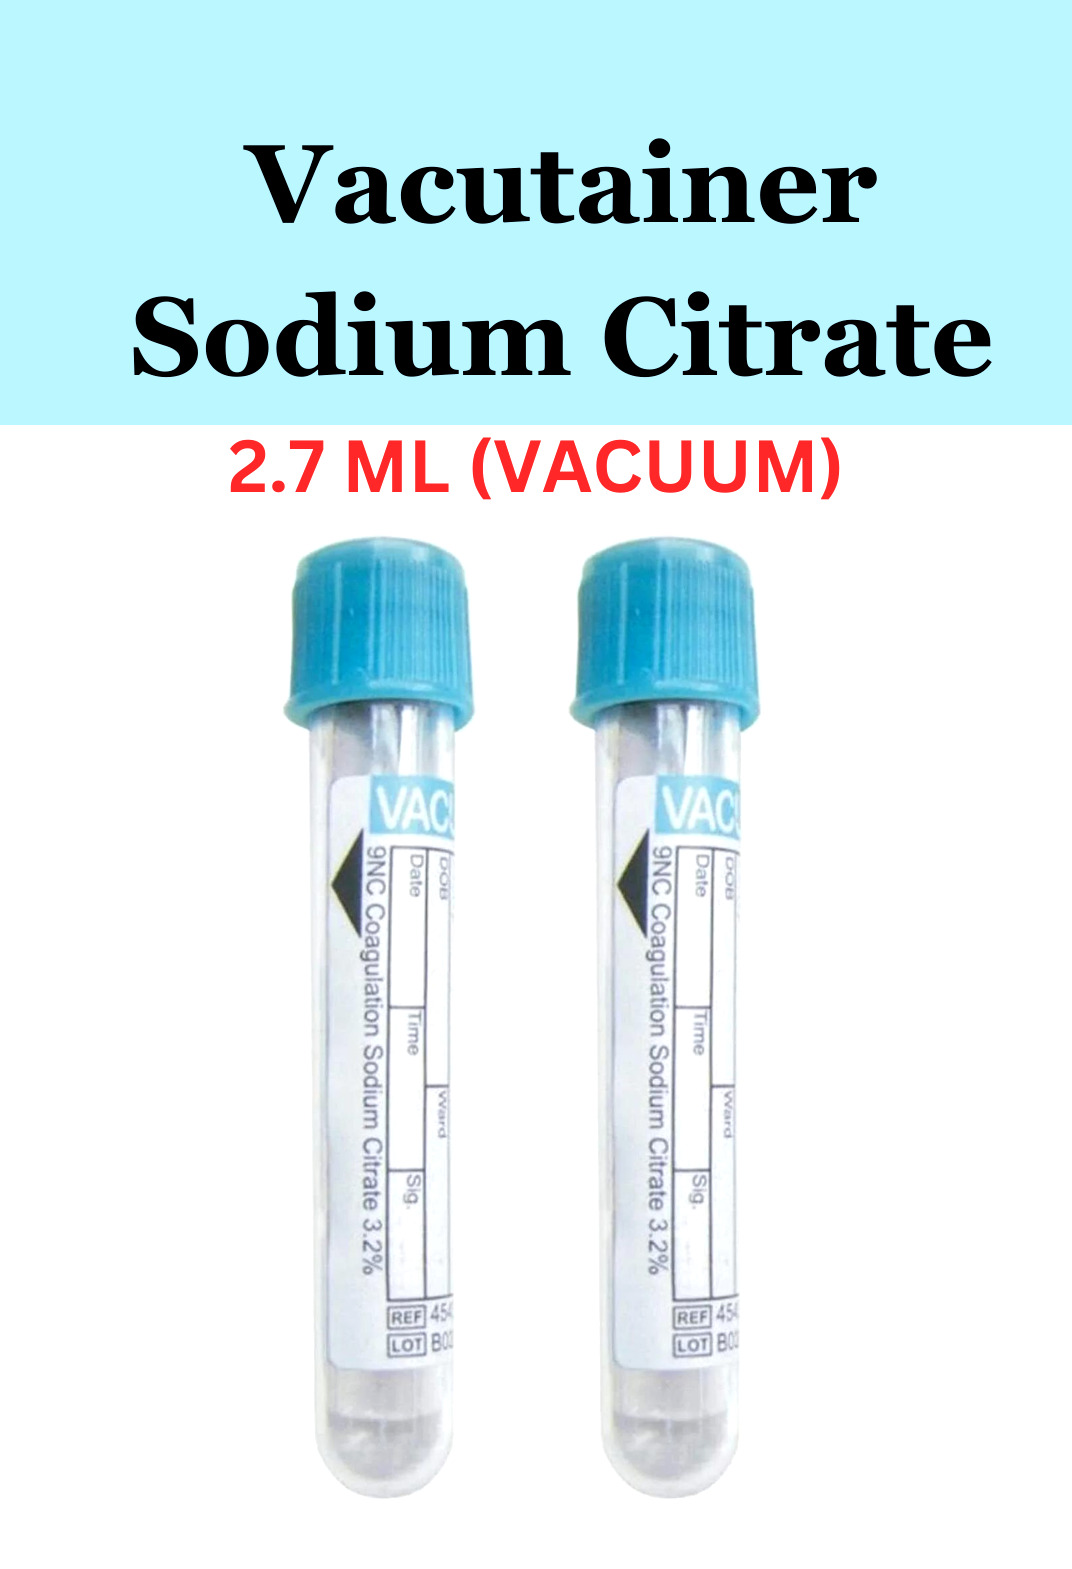 VACUTAINER BLOOD COLLECTION TUBE SODIUM CITRATE 3.2% (2.7ML) VACUUM LONG EXPIRY